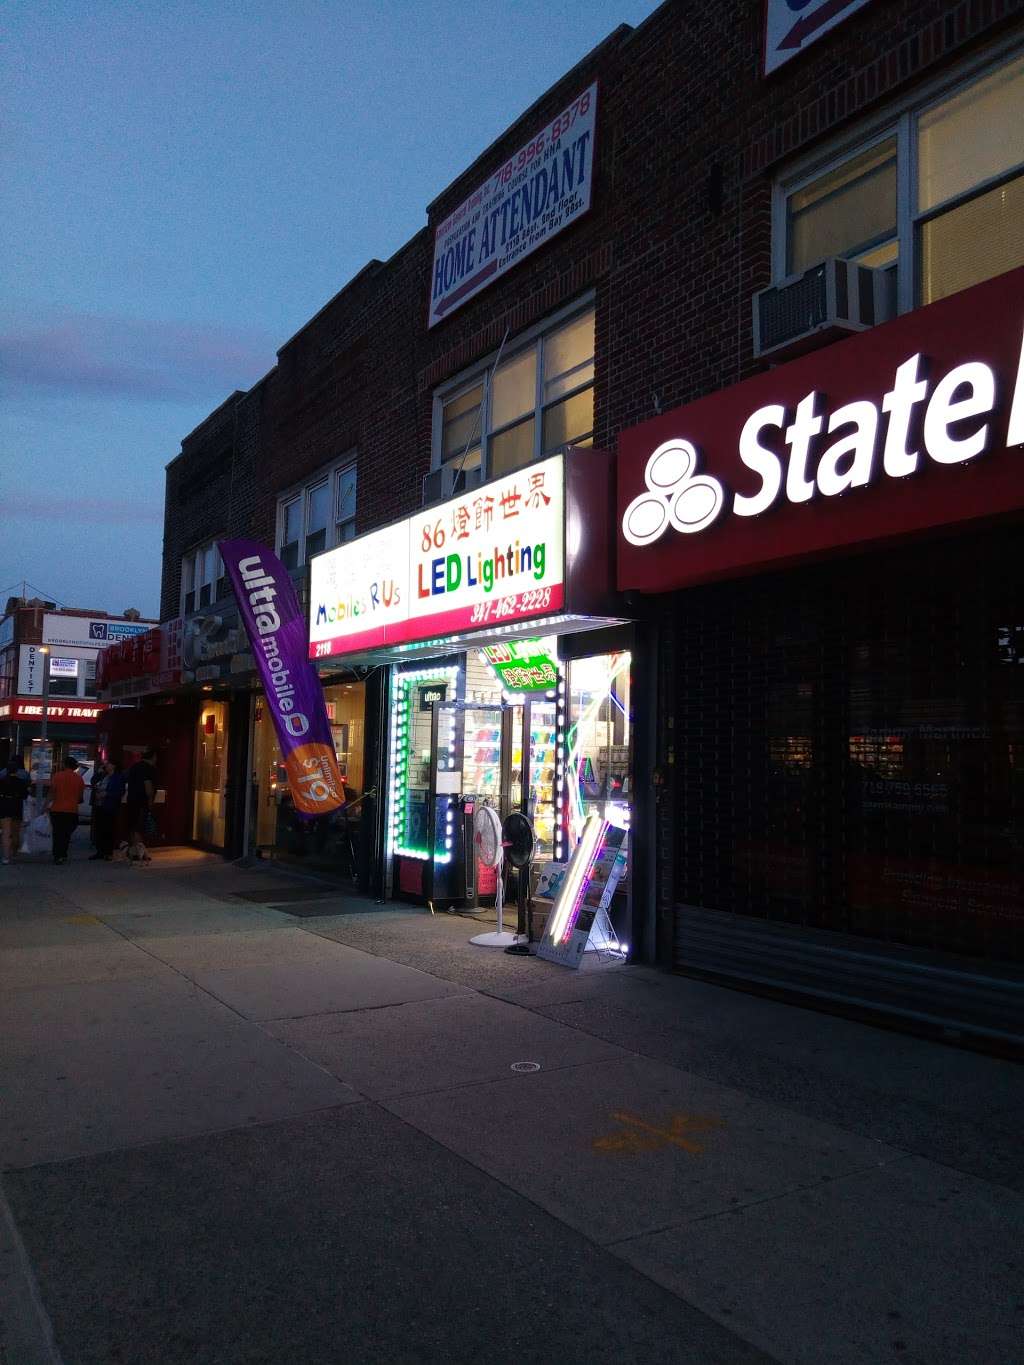 Mobiles R Us | 2118 86th St, Brooklyn, NY 11214 | Phone: (347) 462-2228